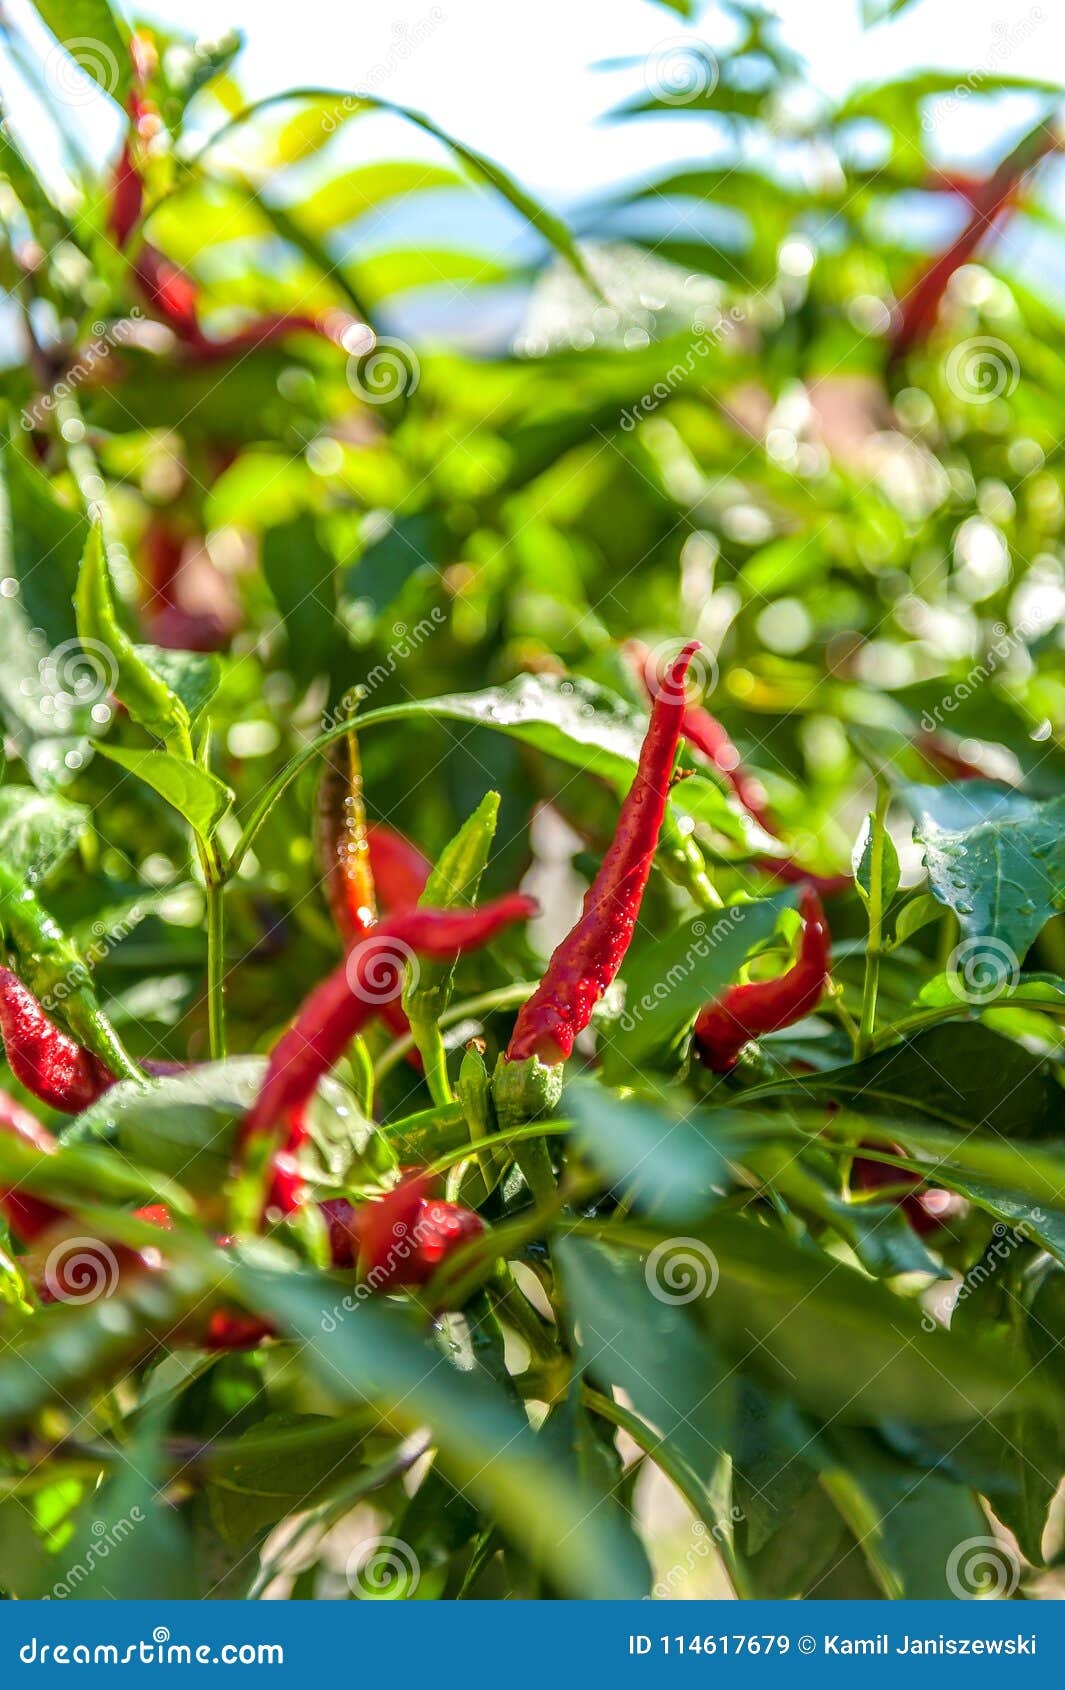 Fresh Spicy Red Peppers On The Bush Stock Image Image Of Calabria Cooking 114617679